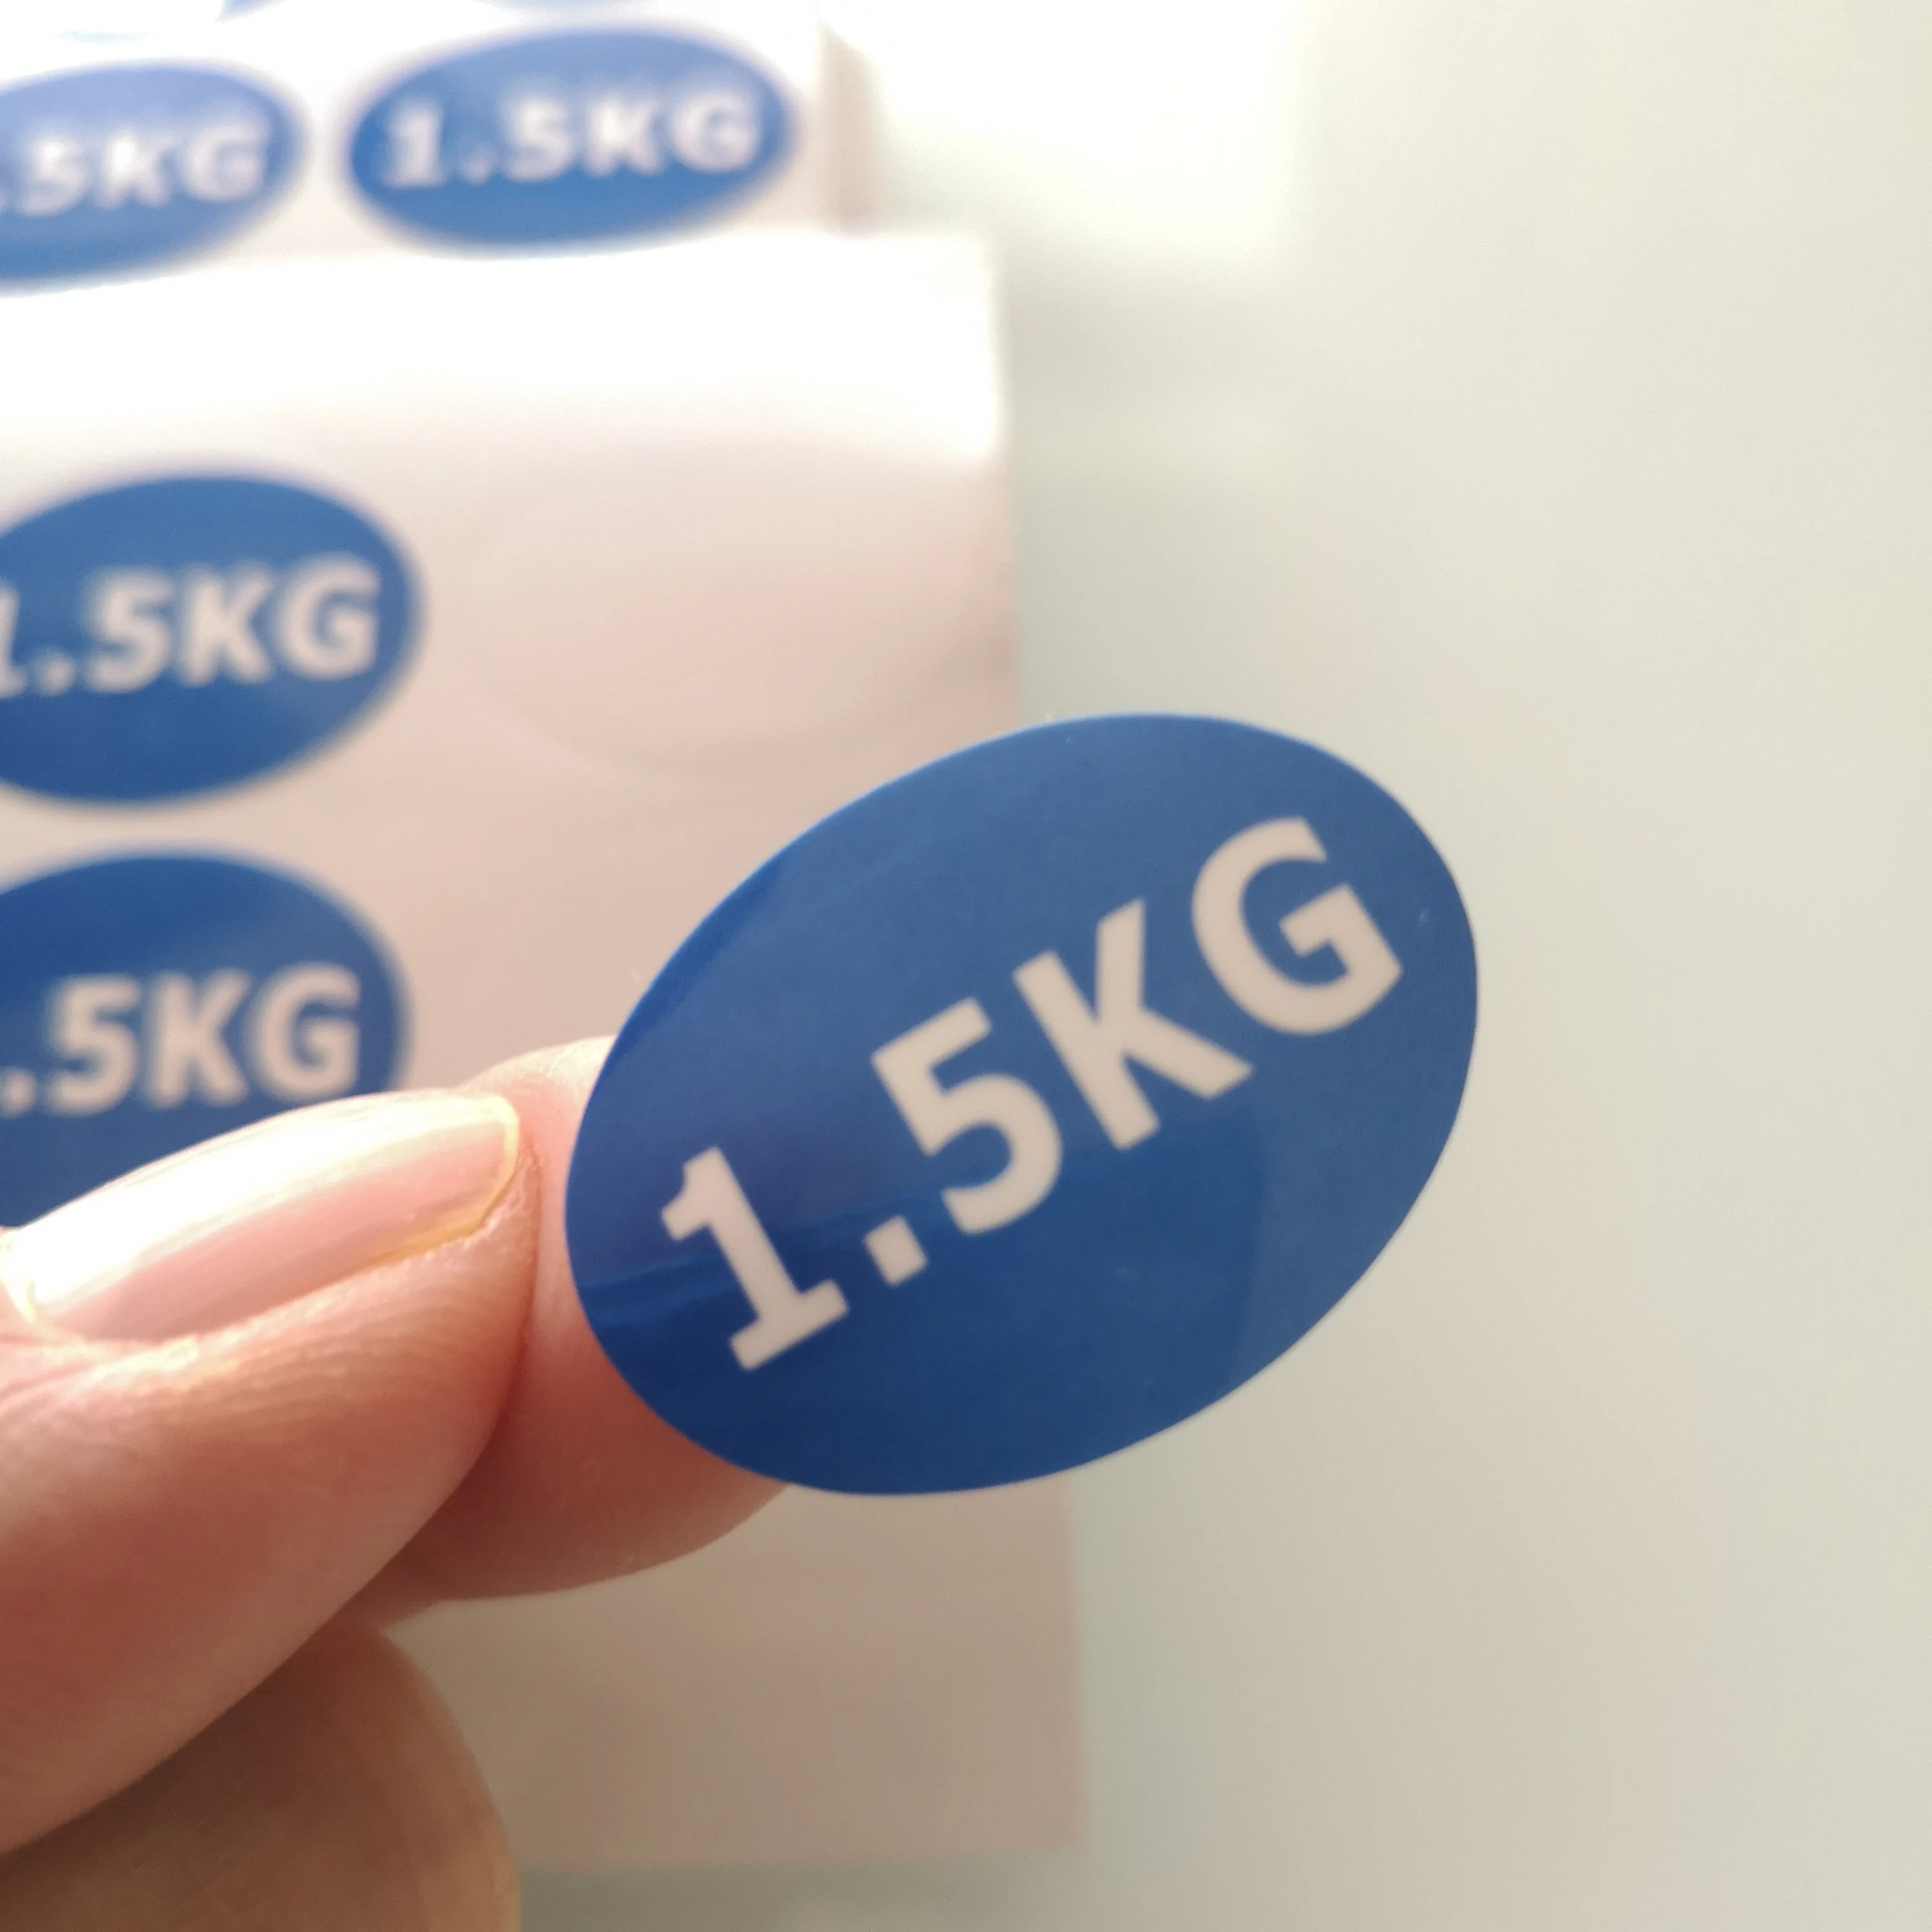 10000pcs 2.7x2cm 1.5KG weight number Self-adhesive paper label sticker for packing, Item No. FA42